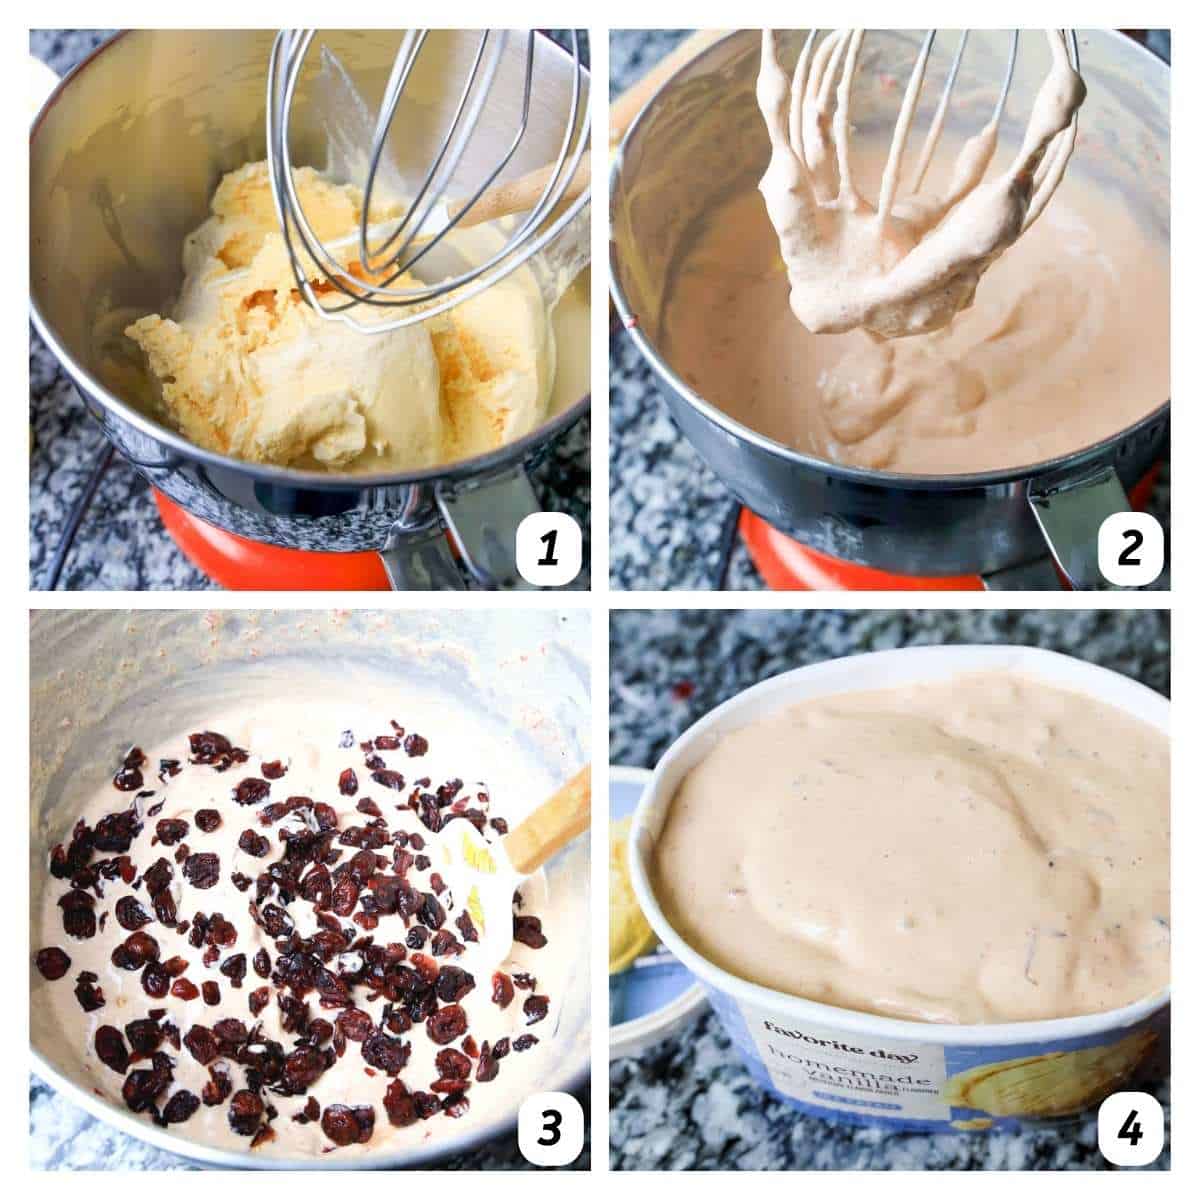 Four panel grid of process shots - mixing slightly melted ice cream and cranberry sauce together, adding the dried cranberries, and freezing overnight.